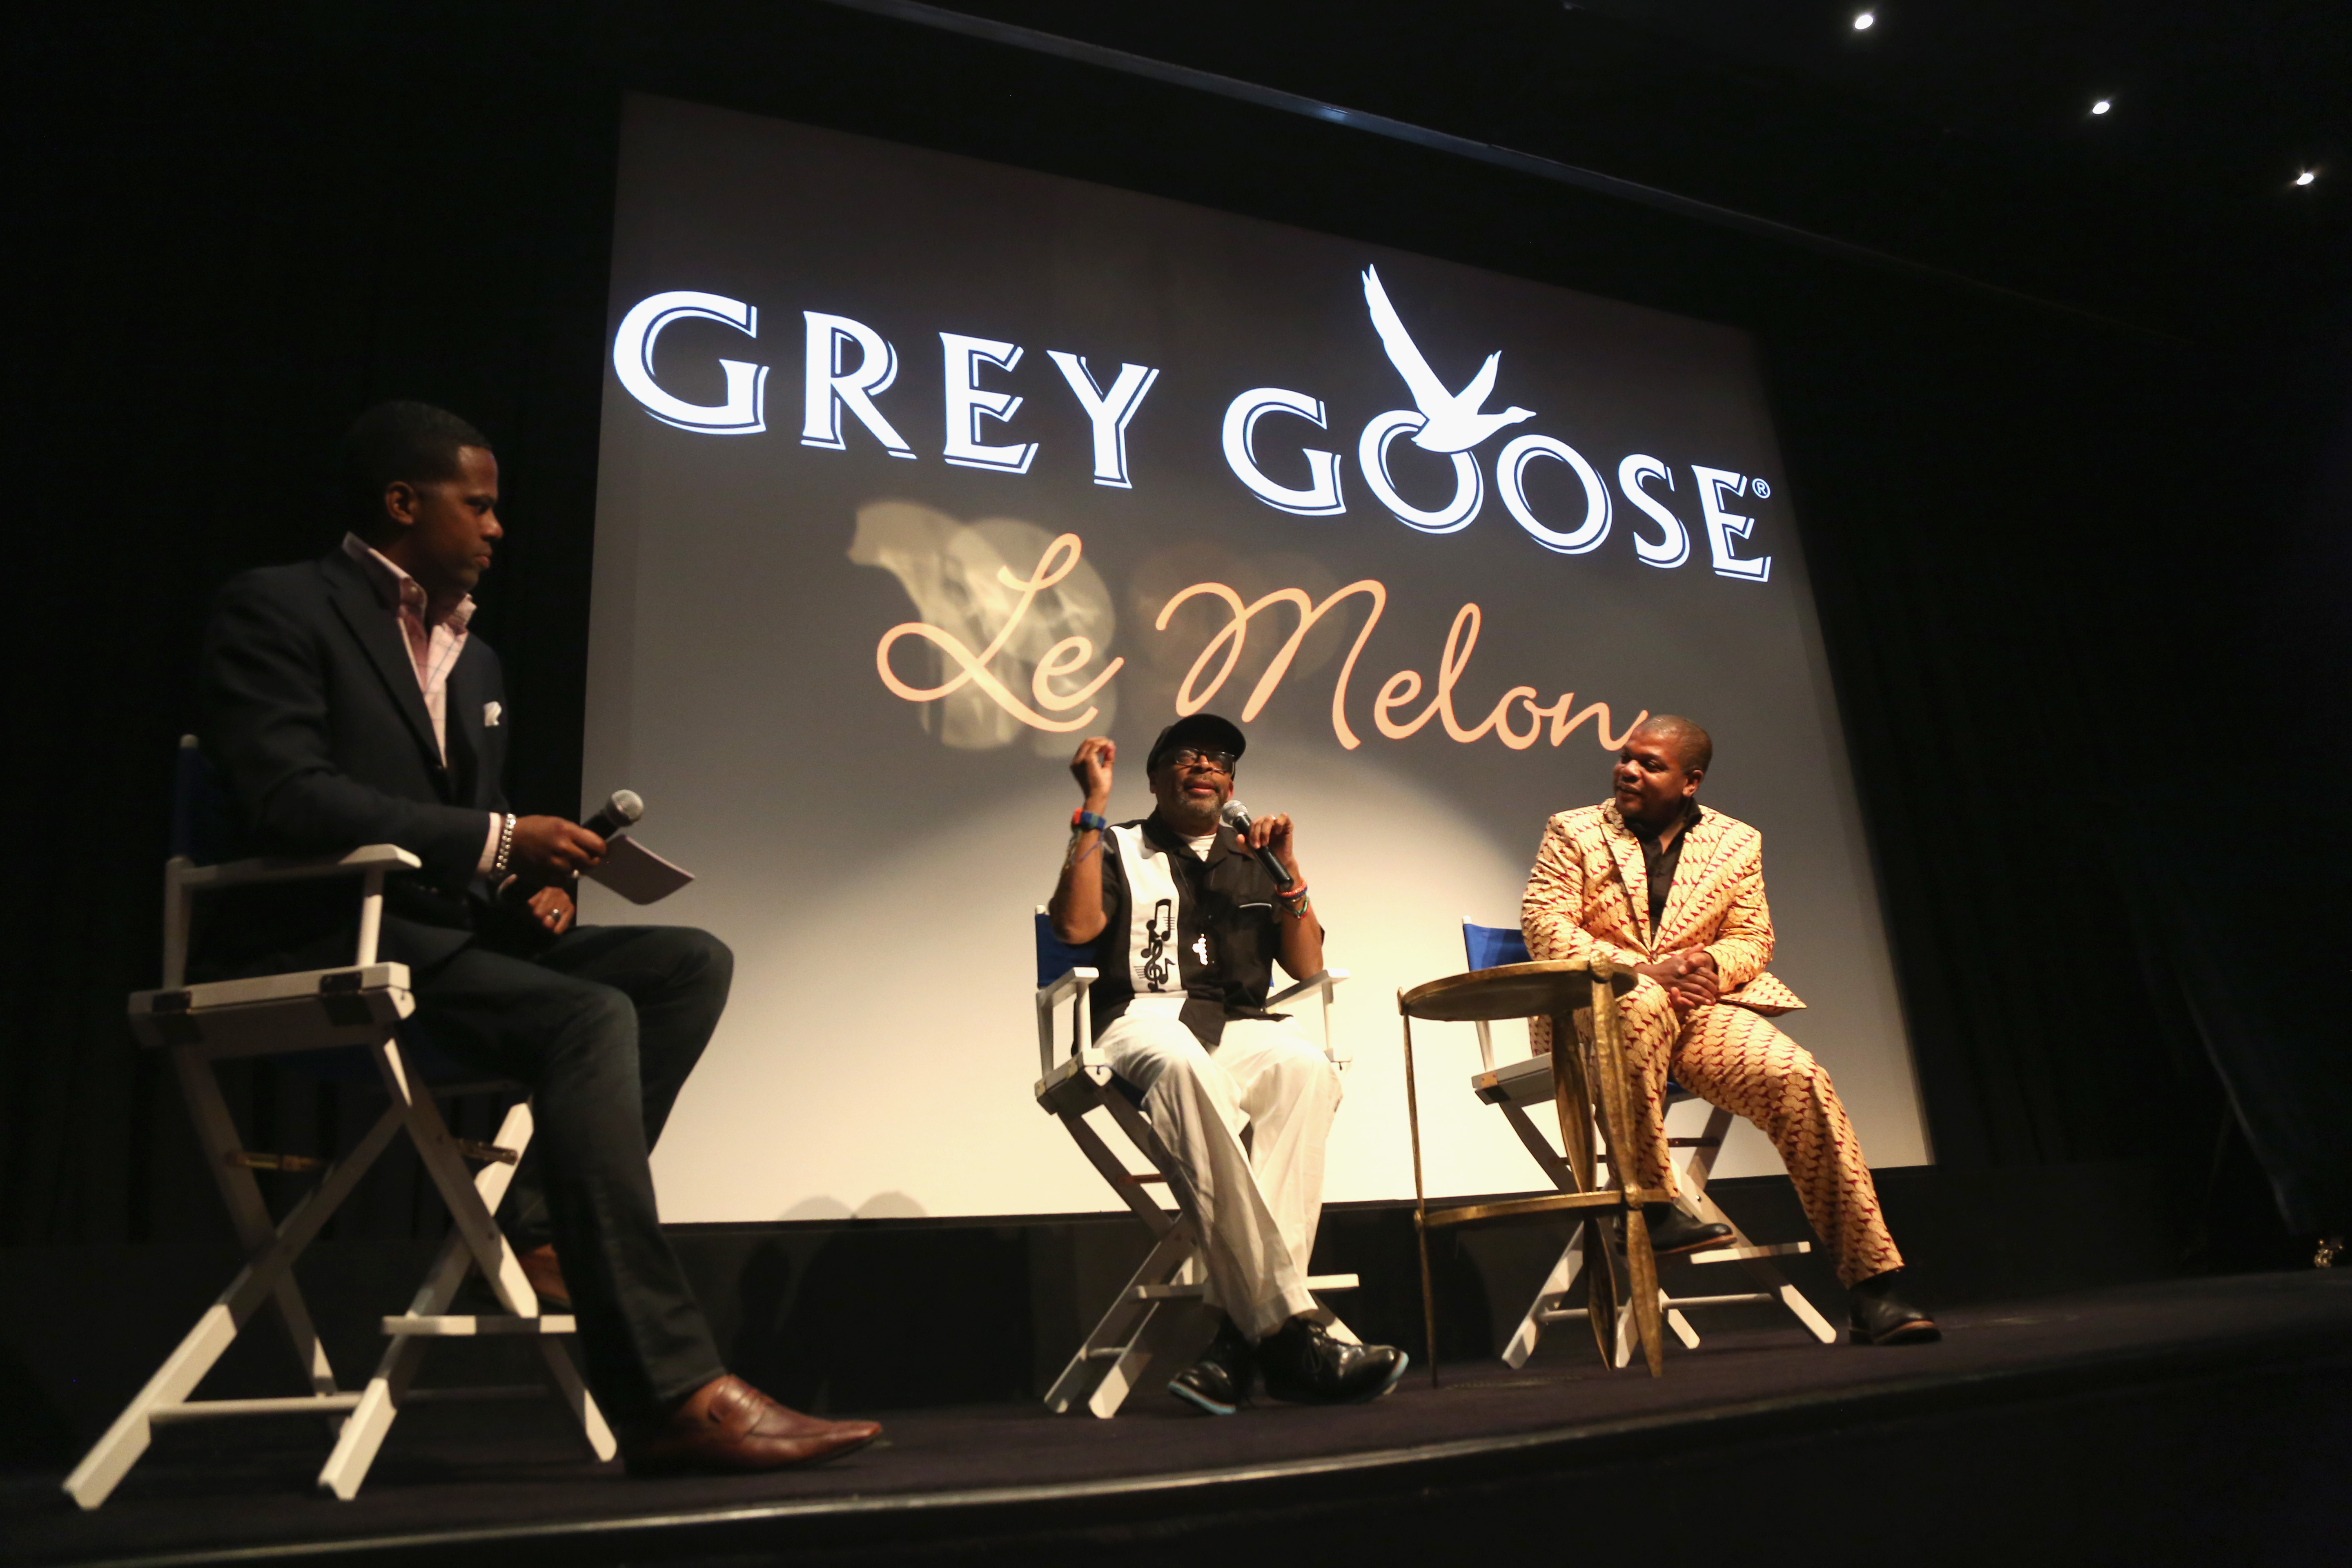 Moderator, TV Personality  AJ Calloway; director, producer Spike Lee and artist, influencer Kehinde Wiley participate in a discussion onstage an evening with Kehinde Wiley & Spike Lee presented by GREY GOOSE Le Melon at Crosby Street Hotel on June 18, 2014 in New York City.  (Photo by Johnny Nunez/Getty Images for GREY GOOSE)